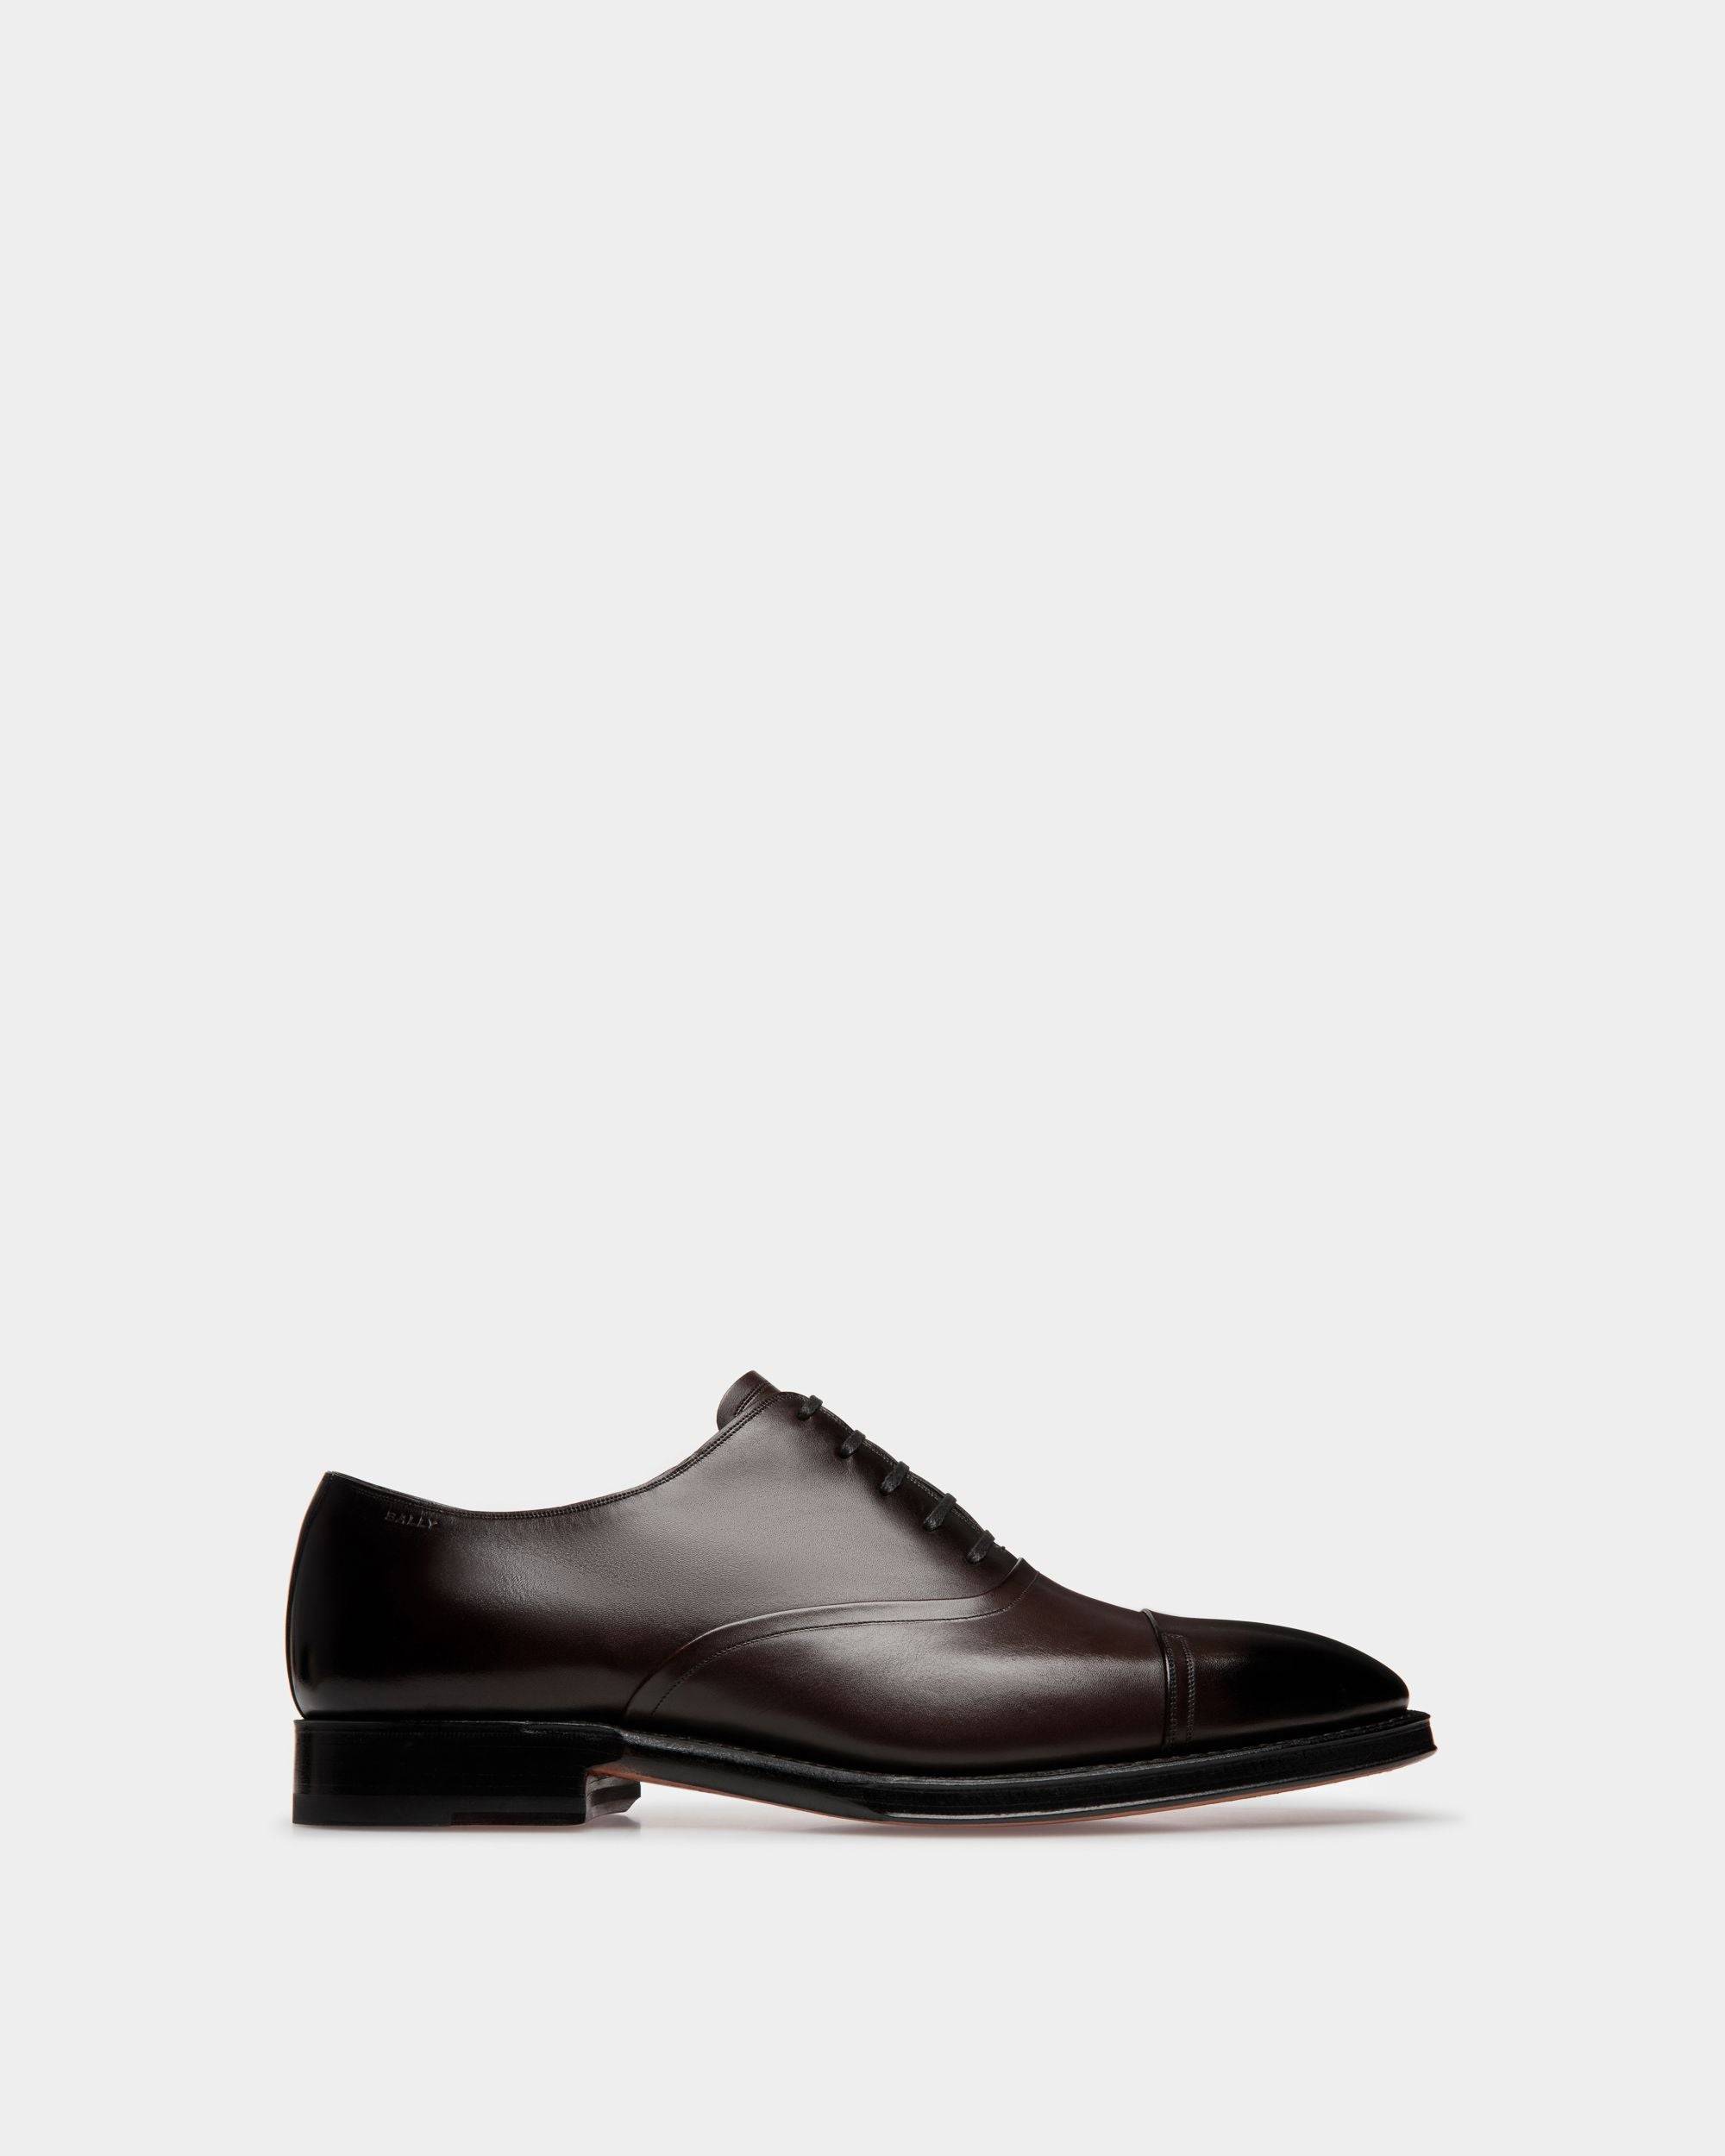 Selby | Men's Oxford Shoes | Brown Leather | Bally | Still Life Side